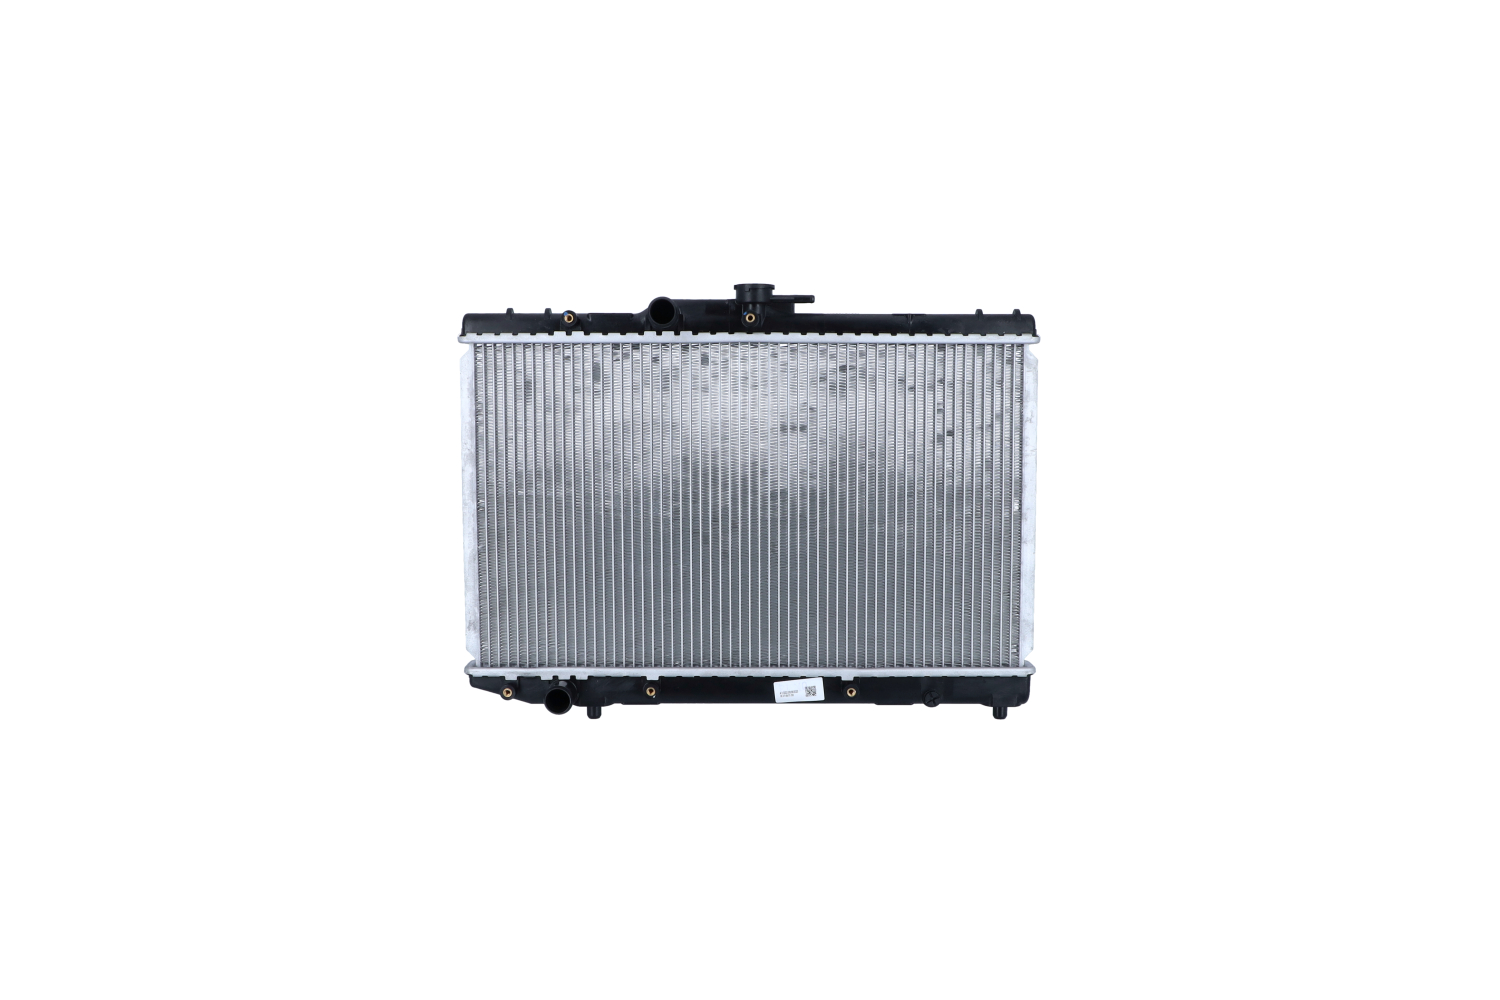 NRF 506725 Engine radiator Aluminium, 585 x 325 x 18 mm, with mounting parts, Brazed cooling fins